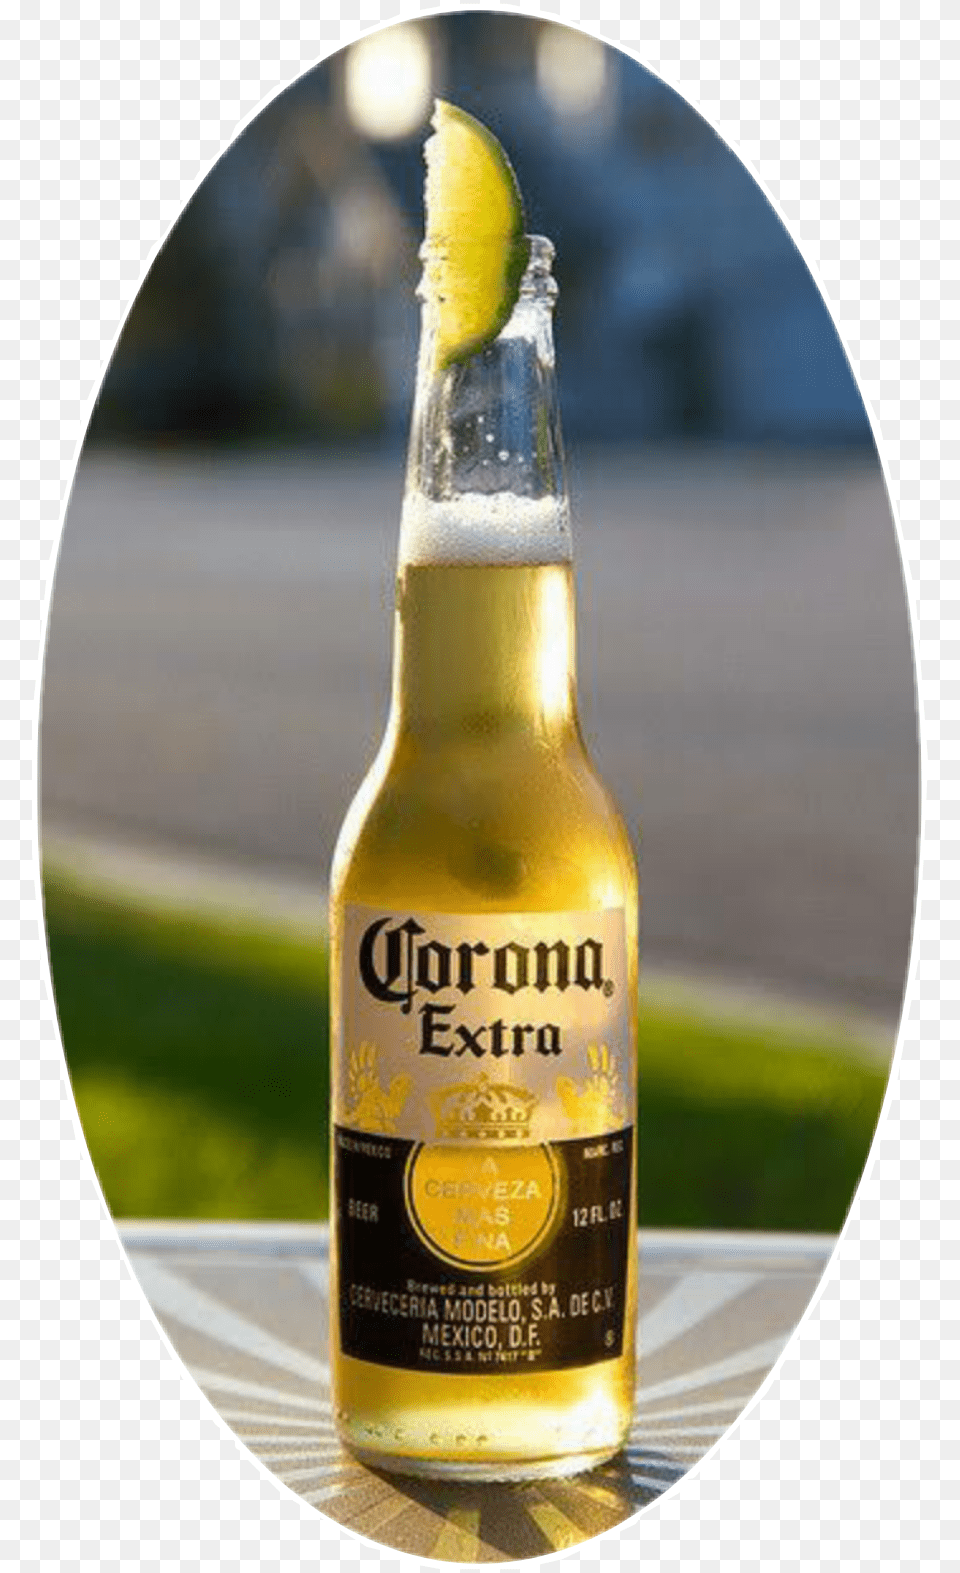 Corona Limonysal Cervezamexicana Mexico Cheve, Alcohol, Beer, Beverage, Photography Free Transparent Png